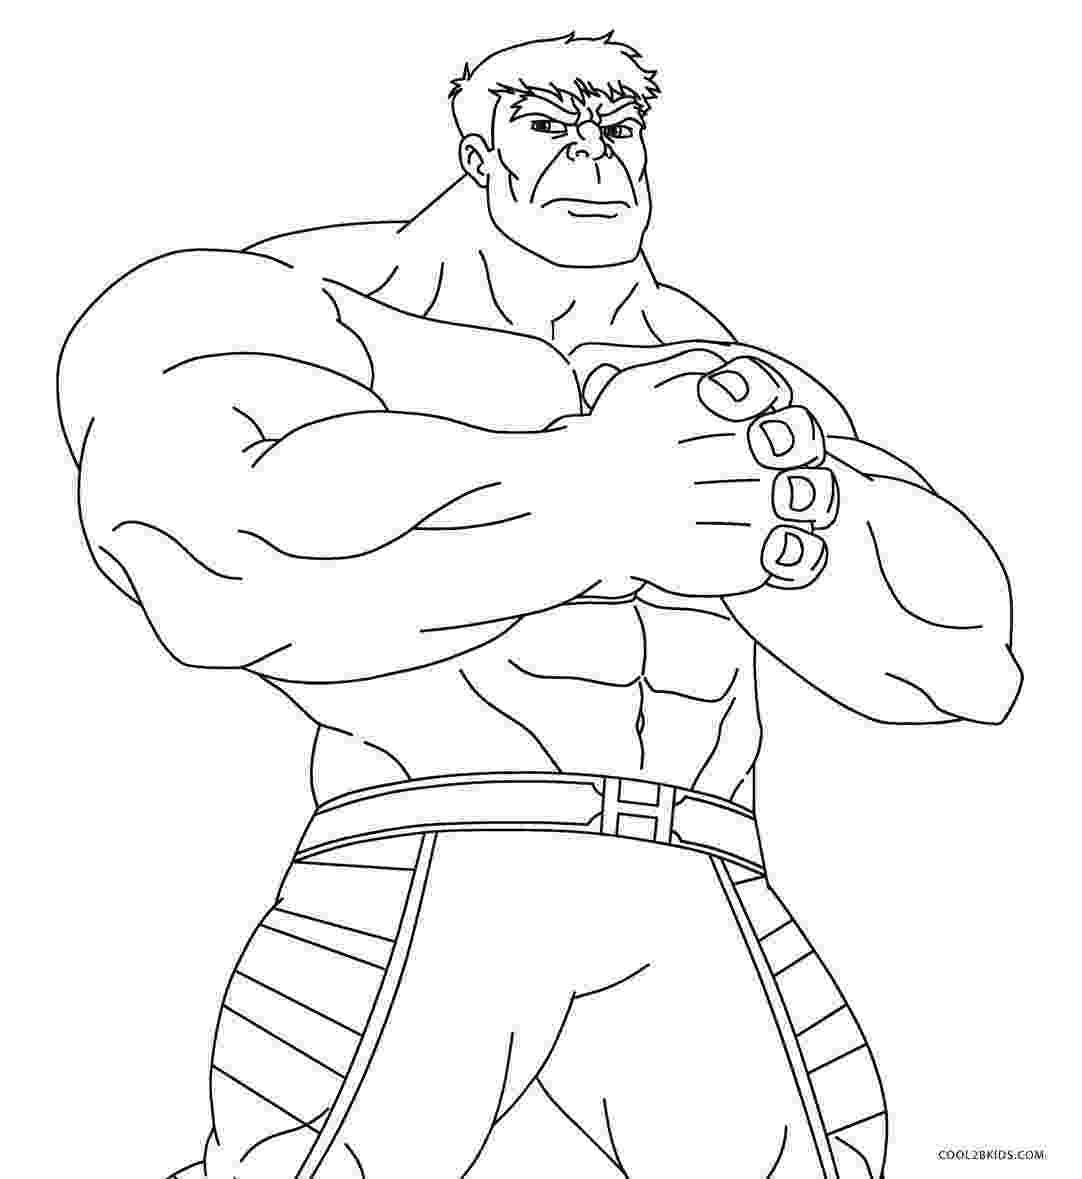 hulk coloring pages to print free free printable hulk coloring pages for kids cool2bkids hulk free coloring print to pages 